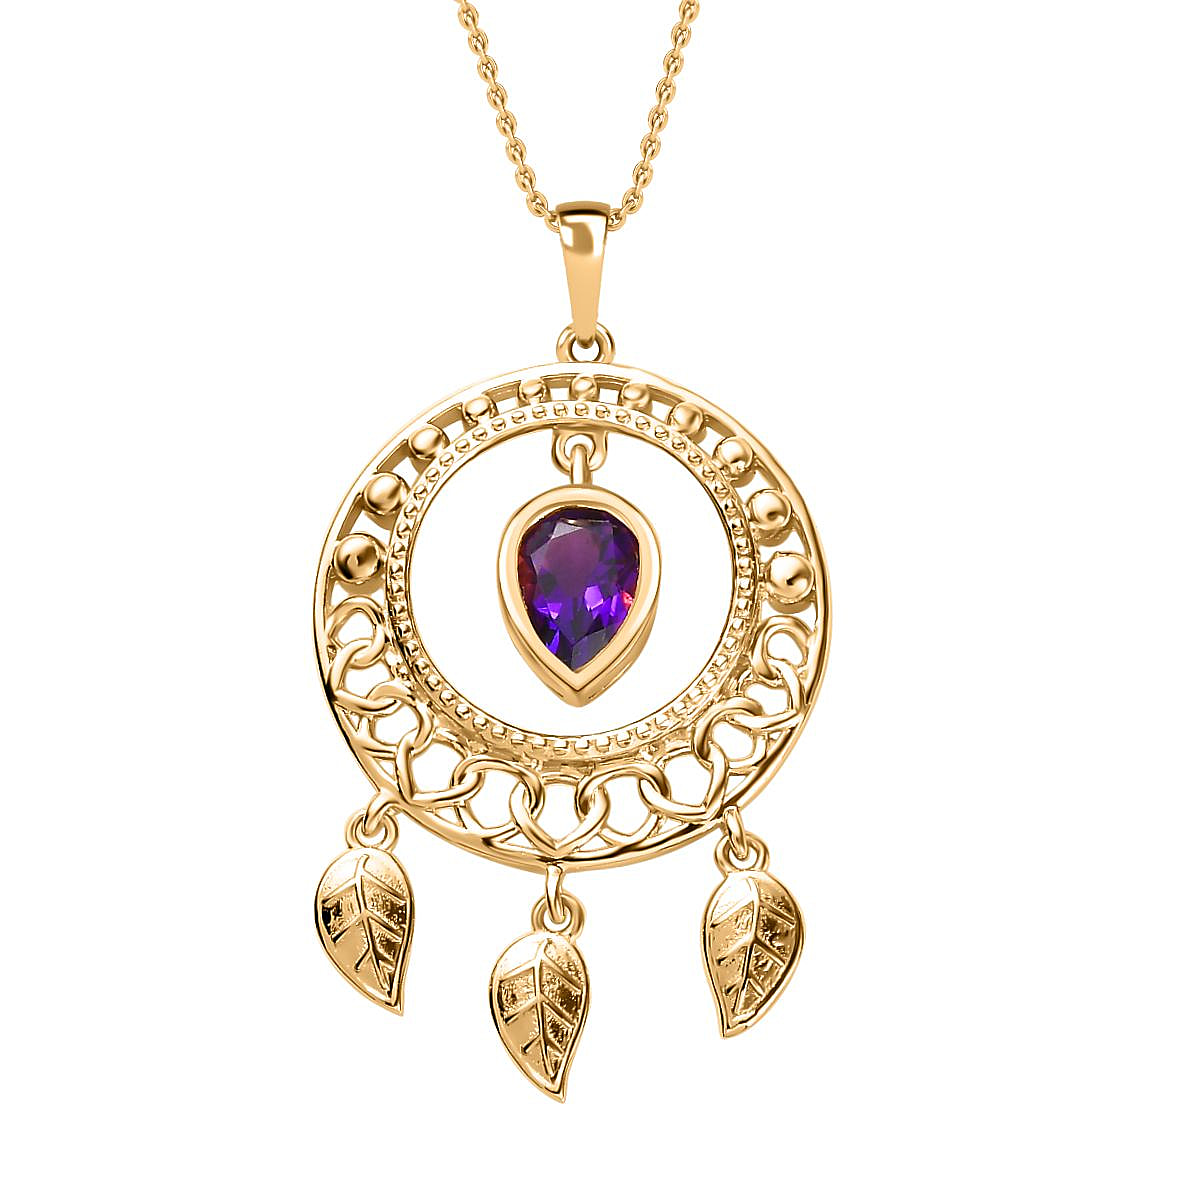 Moroccan Amethyst Pendant with Chain (Size 20) in 18K Vermeil YG Plated  Sterling Silver Wt. 8.17 Gms 1.060 Ct.